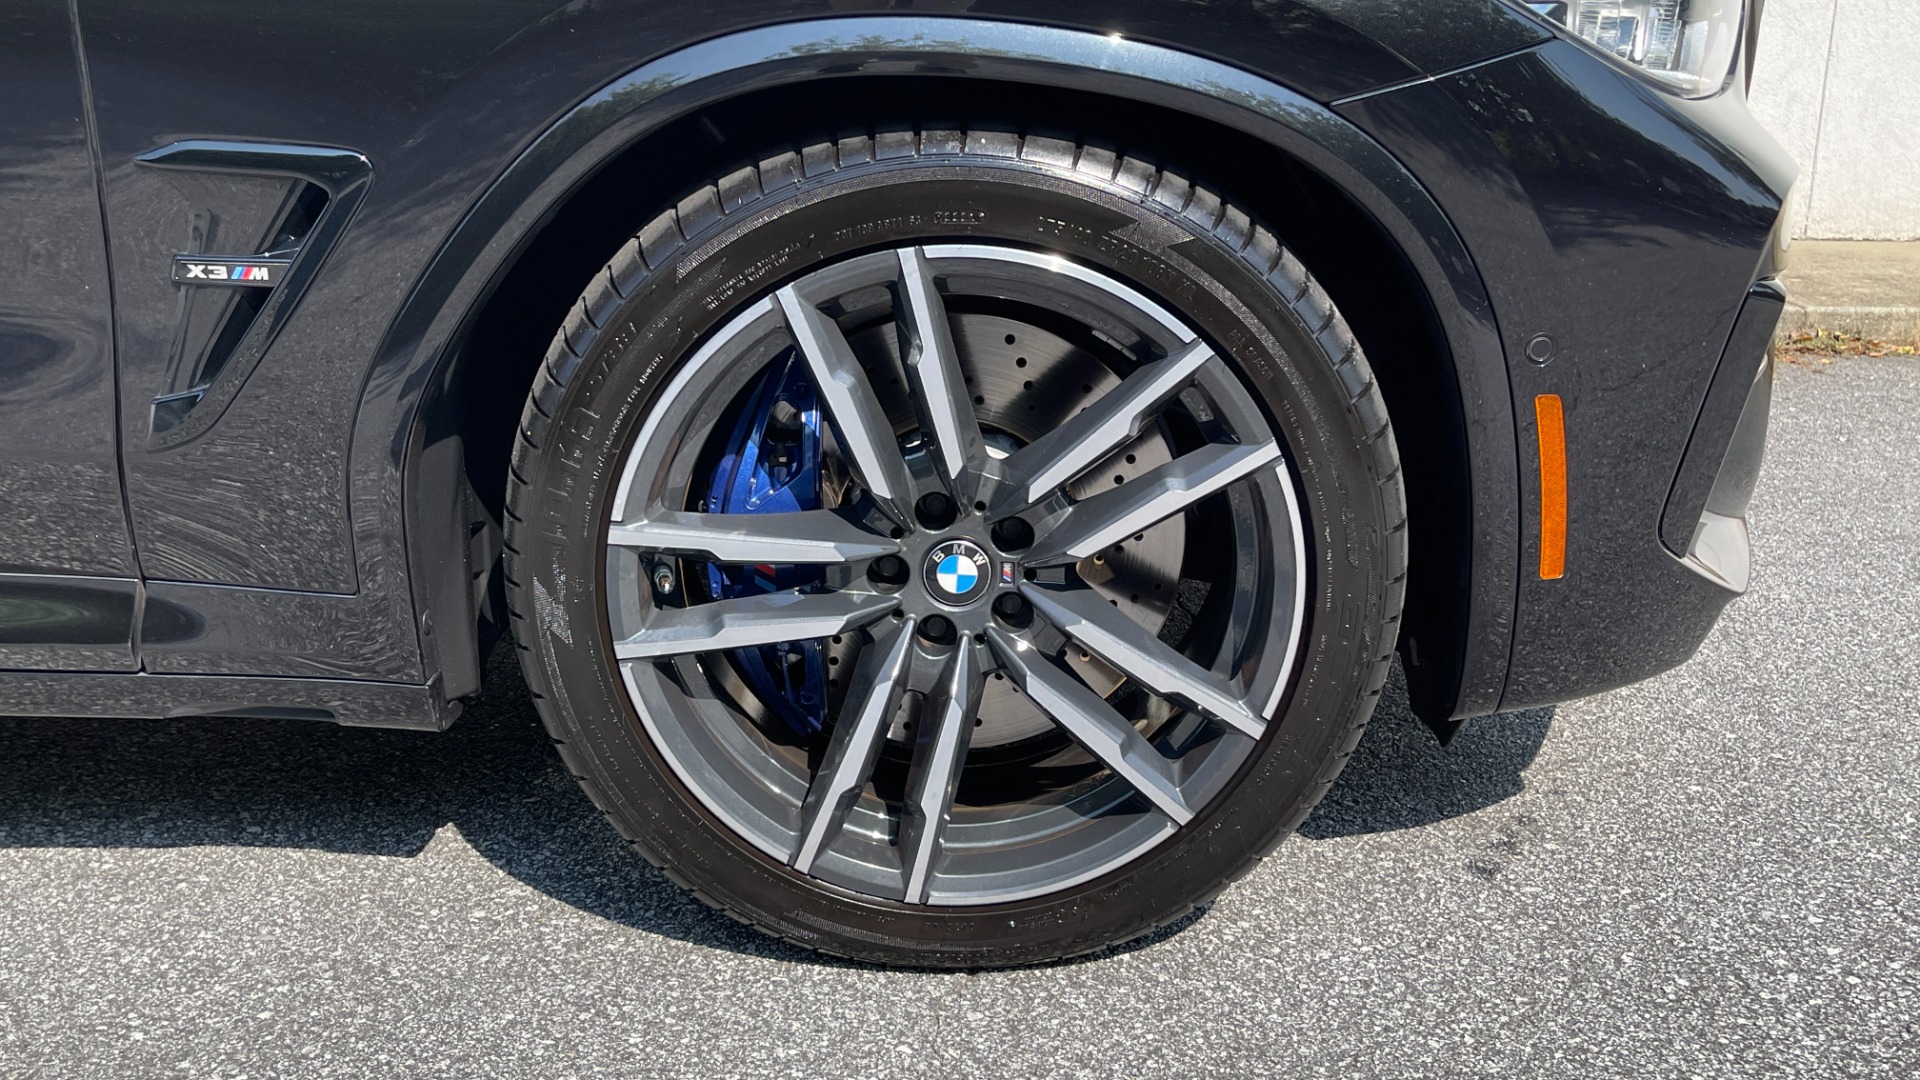 Used 2020 BMW X3 M EXECUTIVE PACKAGE / HEADS UP DISPLAY / WIFI / WIRELESS CHARGING / PANORAMIC for sale $52,915 at Formula Imports in Charlotte NC 28227 43